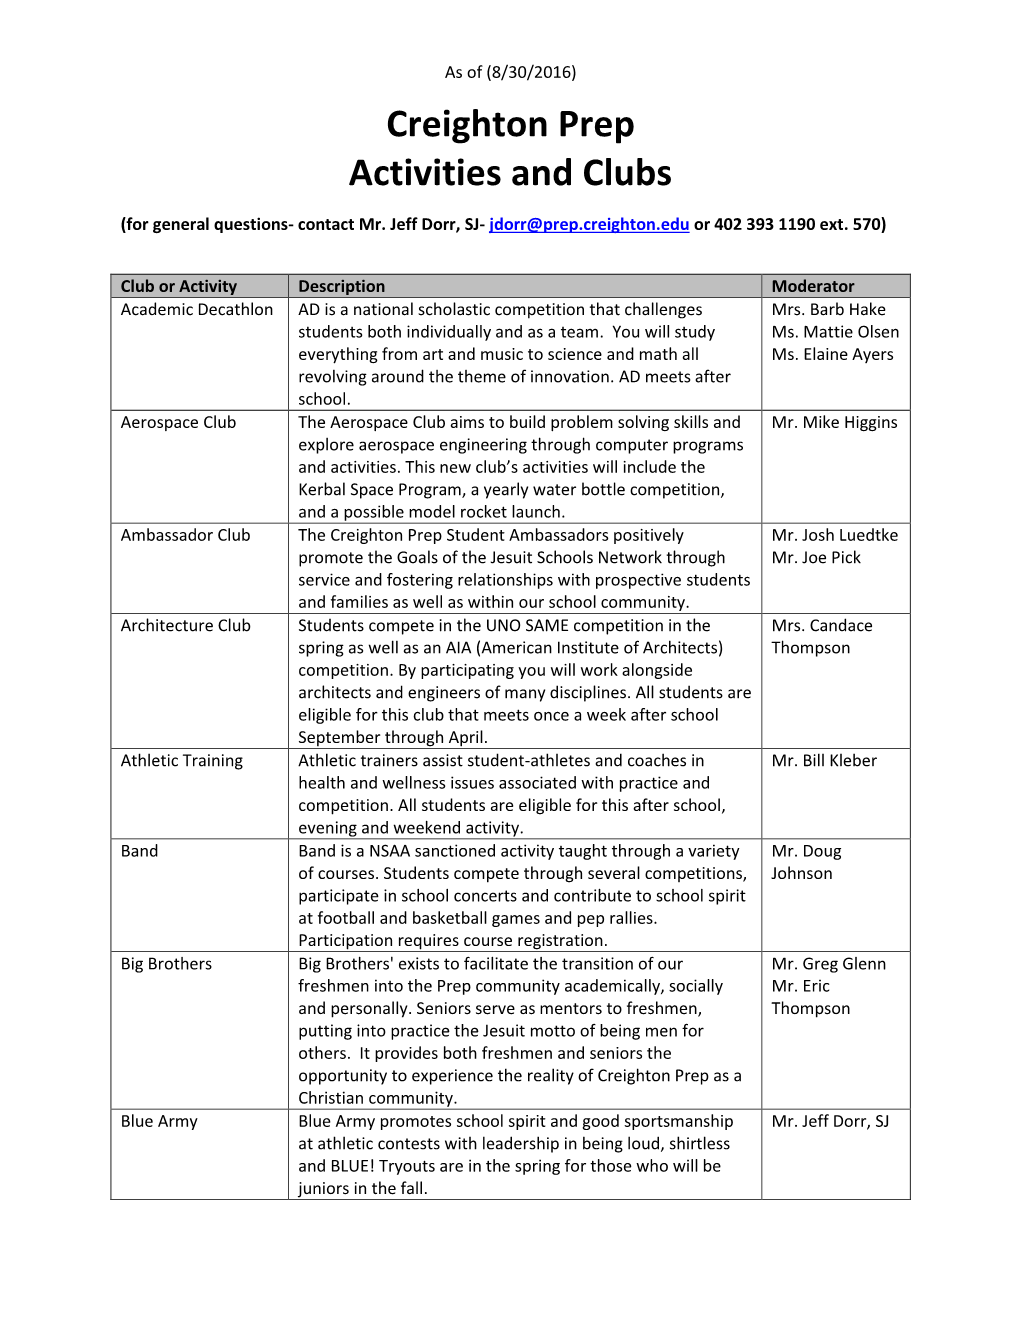 Creighton Prep Activities and Clubs